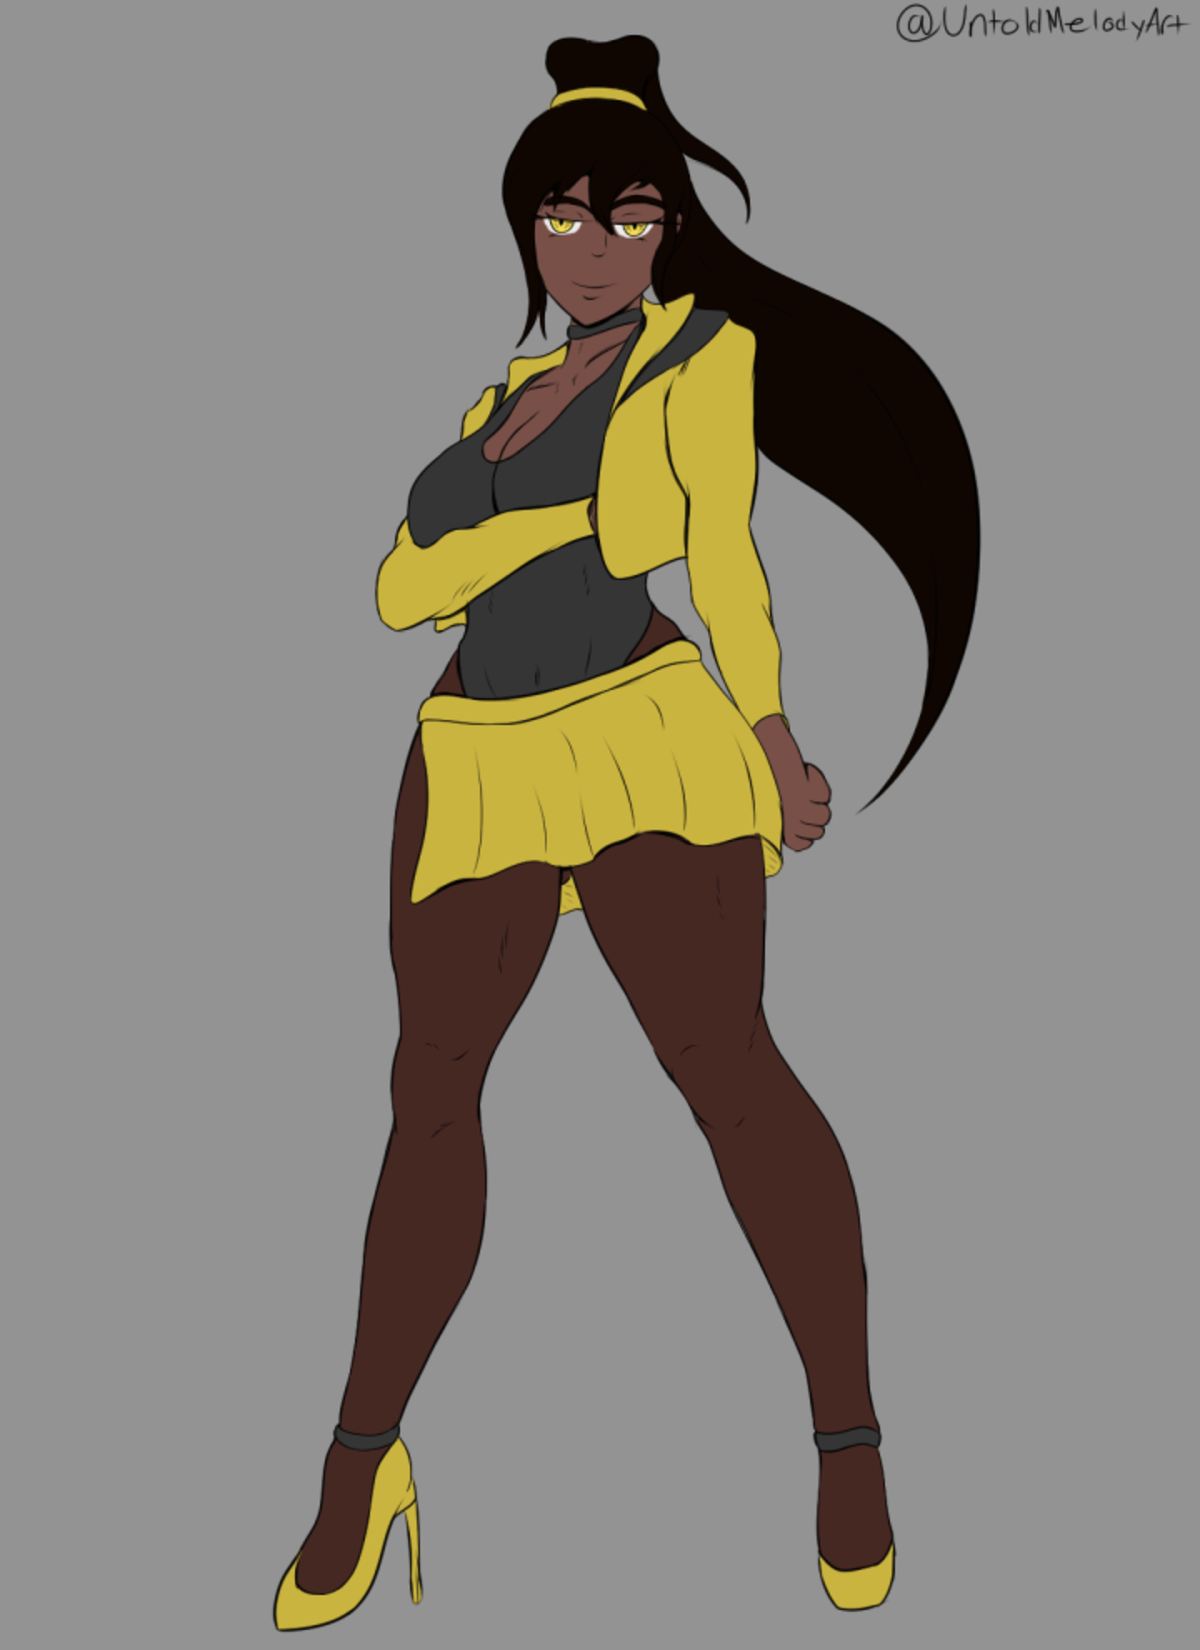 Made a new outfit for Tia. . I may shade this sometime later. I mainly wanted to visualise a new outfit and I'm quite content with this... Mm yes, chocolate